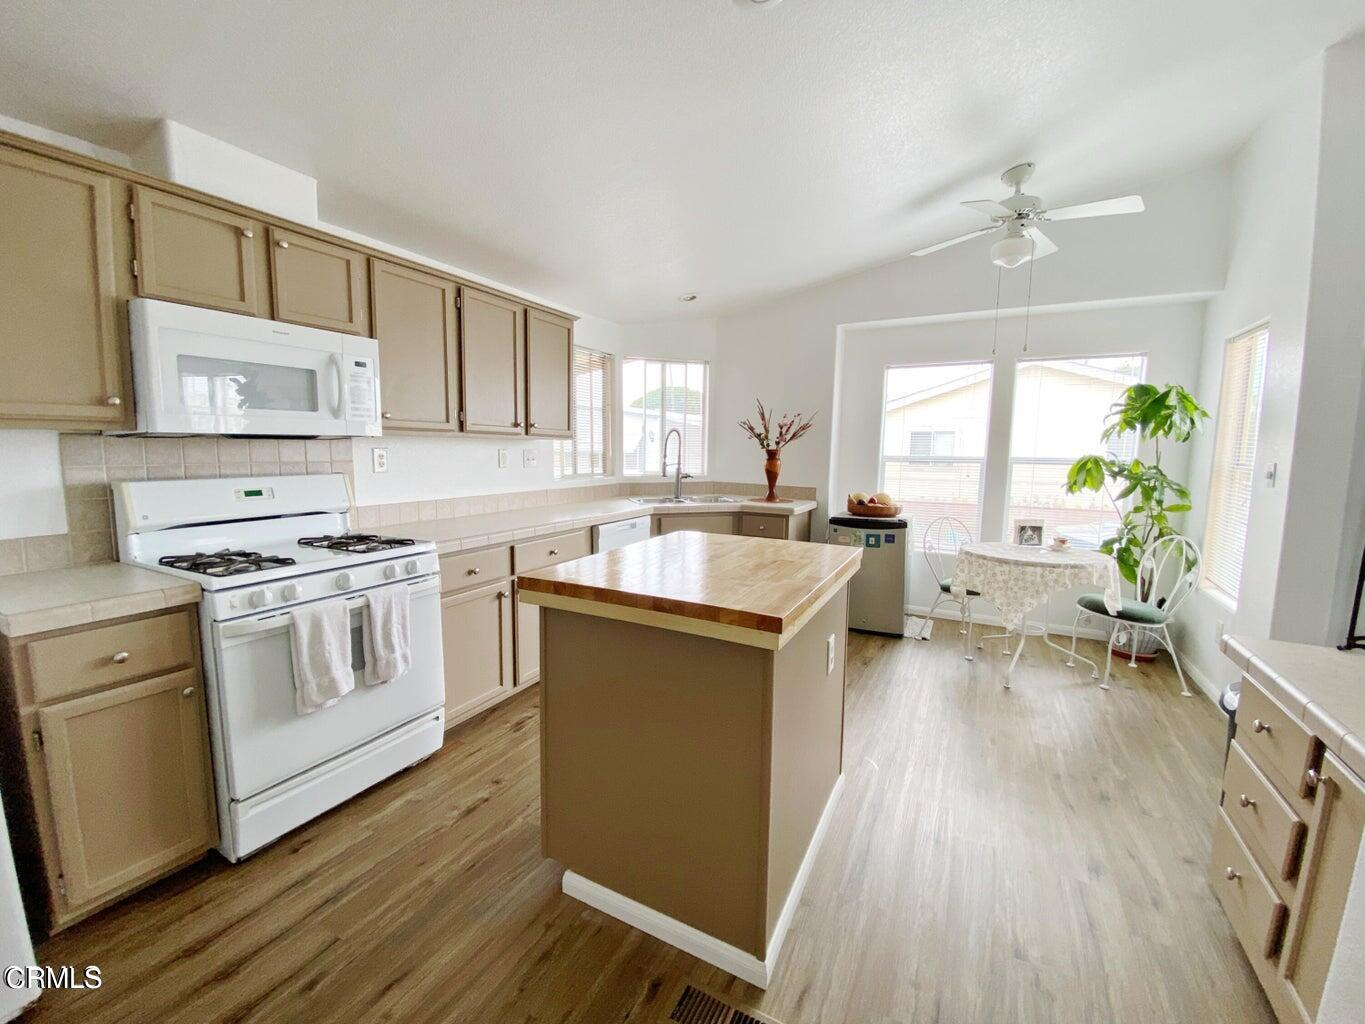 a kitchen with stainless steel appliances a white cabinets and wooden floor